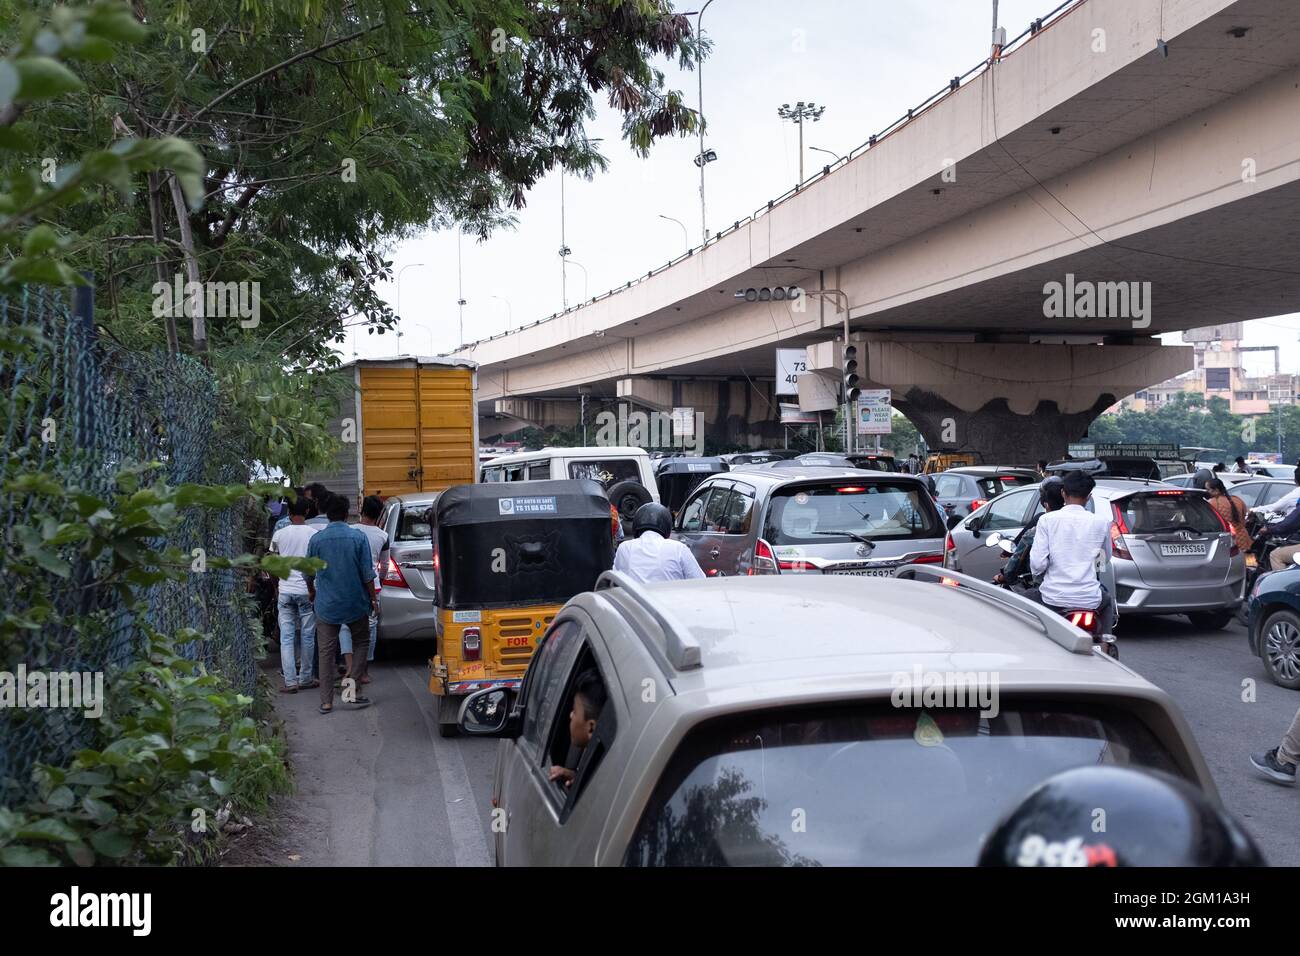 Hyderabad, India.12 September, 2021. Traffic jam during rush hour leaving no room for even pedestrians to walk. Stock Photo